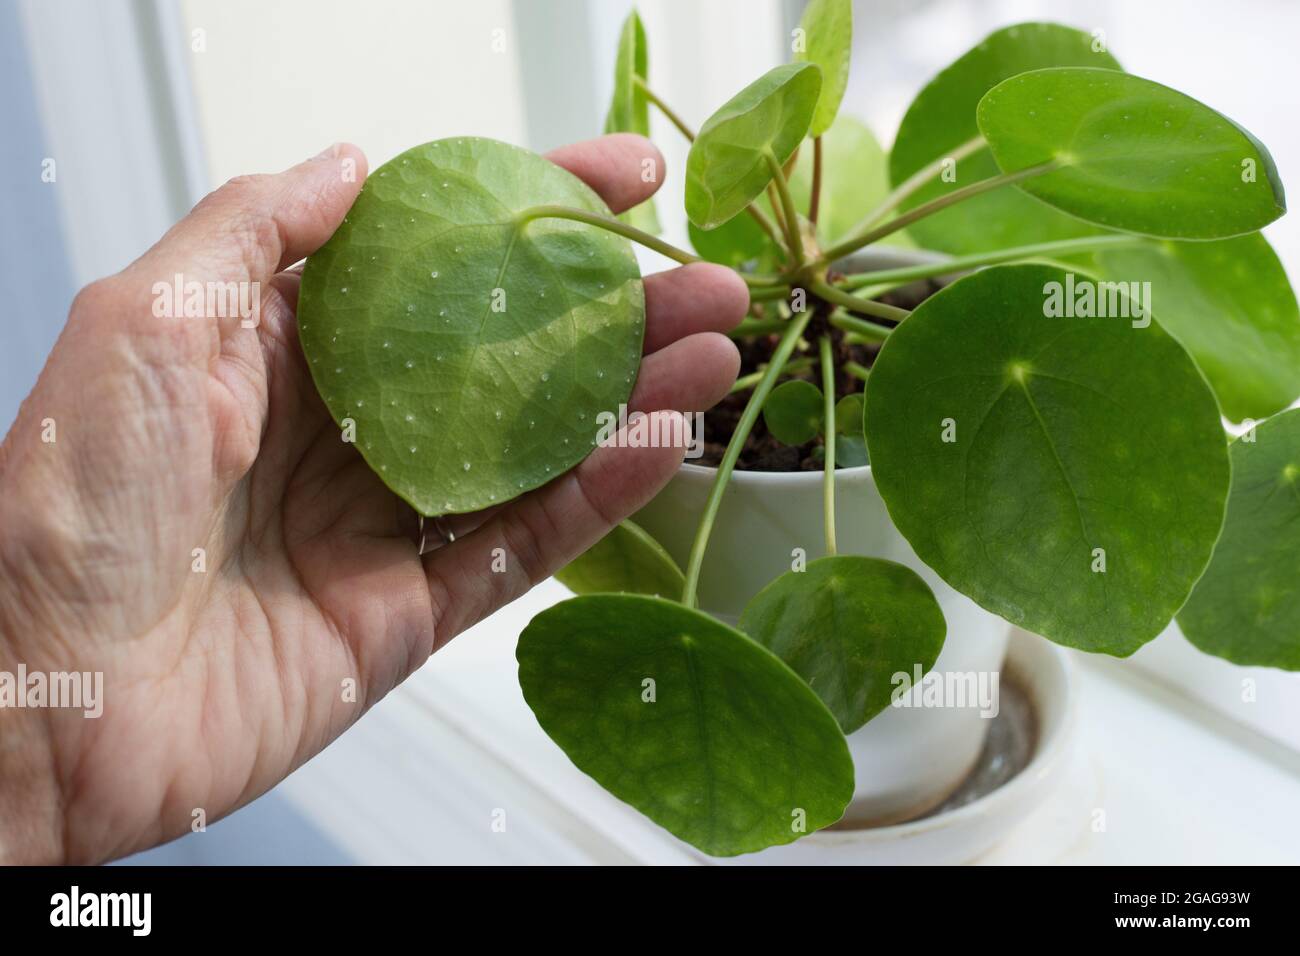 A pilea peperomioides houseplant with mineral deposits on the underside of leaves, a normal condition. Stock Photo